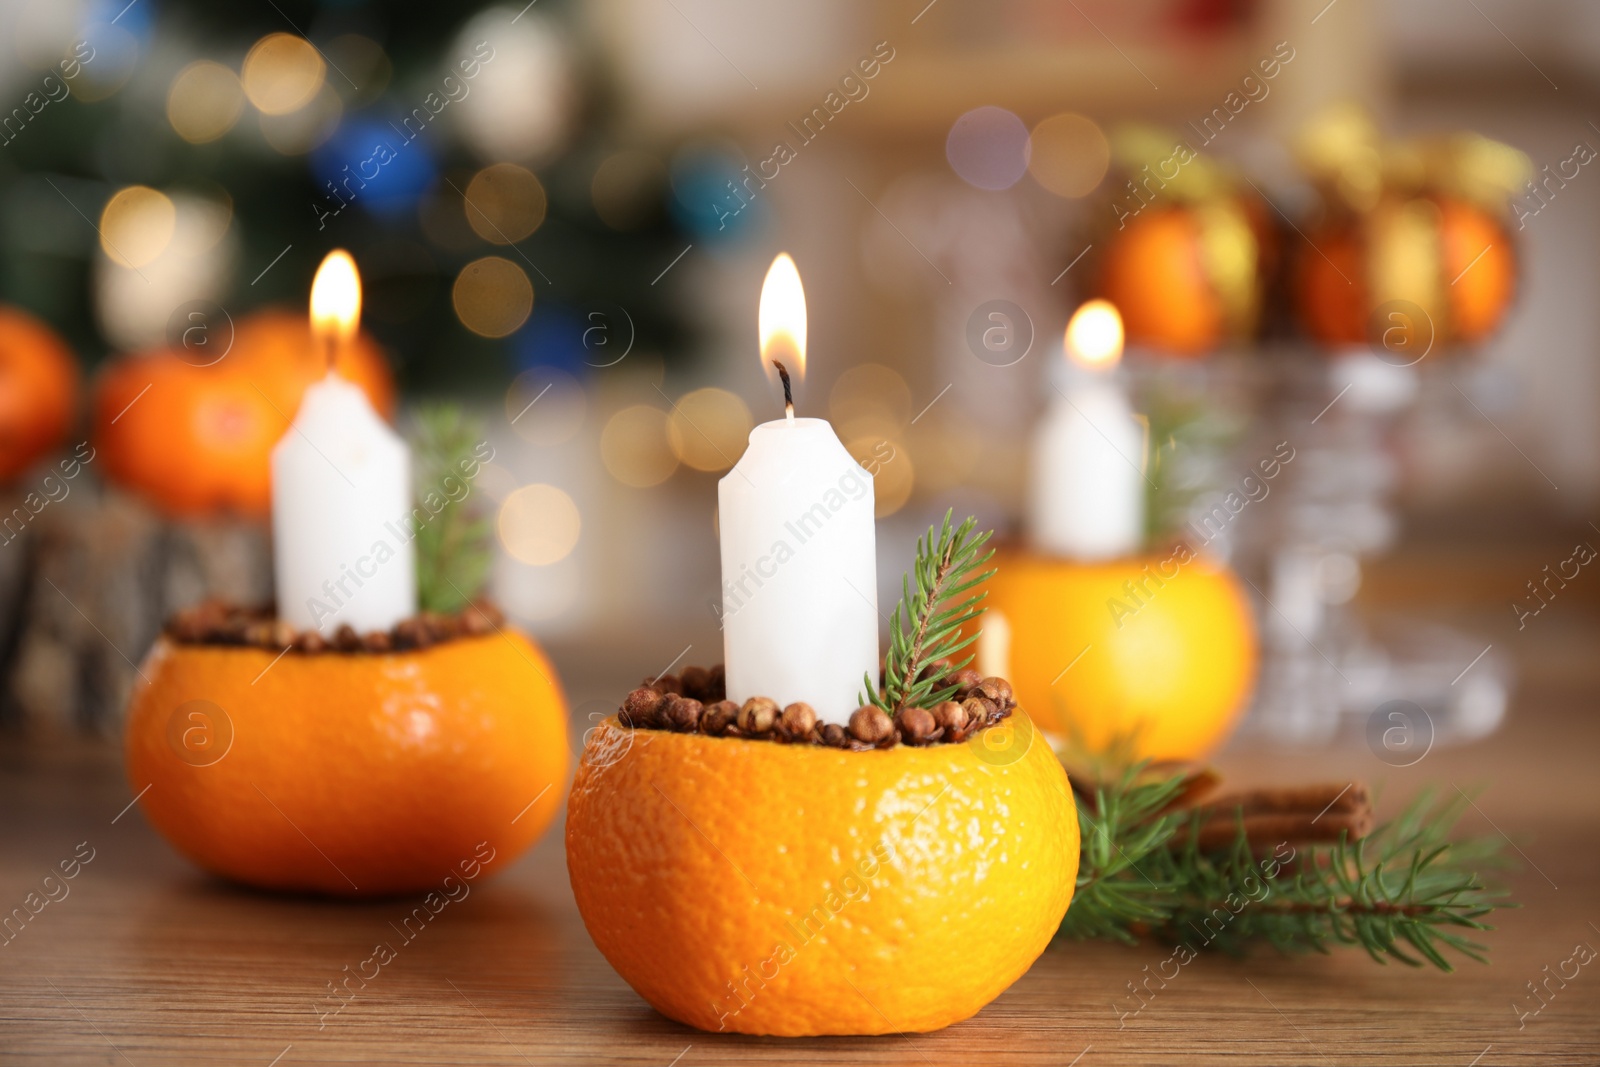 Photo of Burning candle in tangerine peel as holder on wooden table